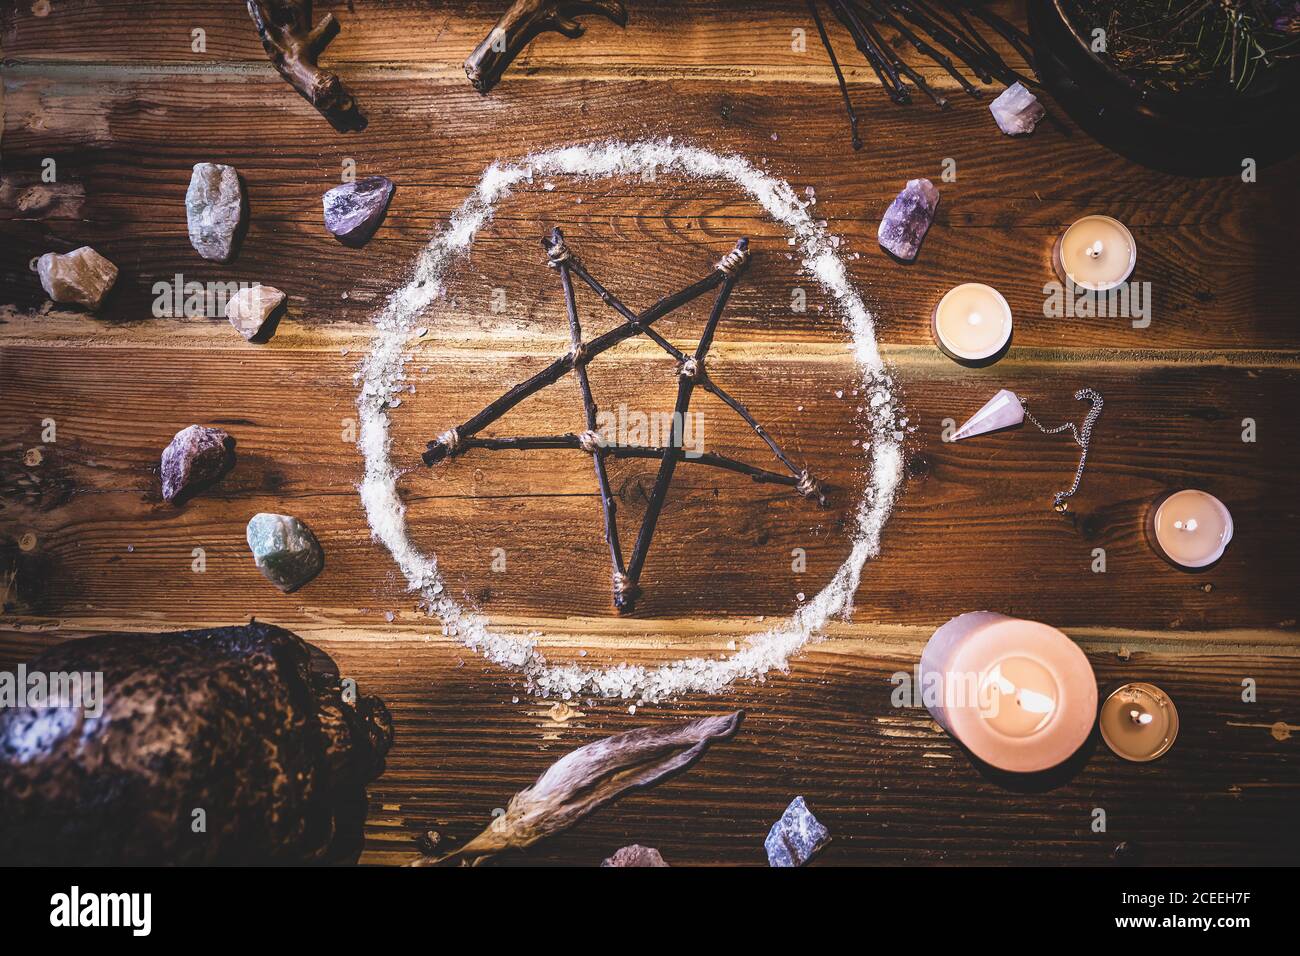 Ingredients and materials for an occultly ritual with an pentagram or pentacle, gemstones, a pendulum and a human skull, flatlay Stock Photo